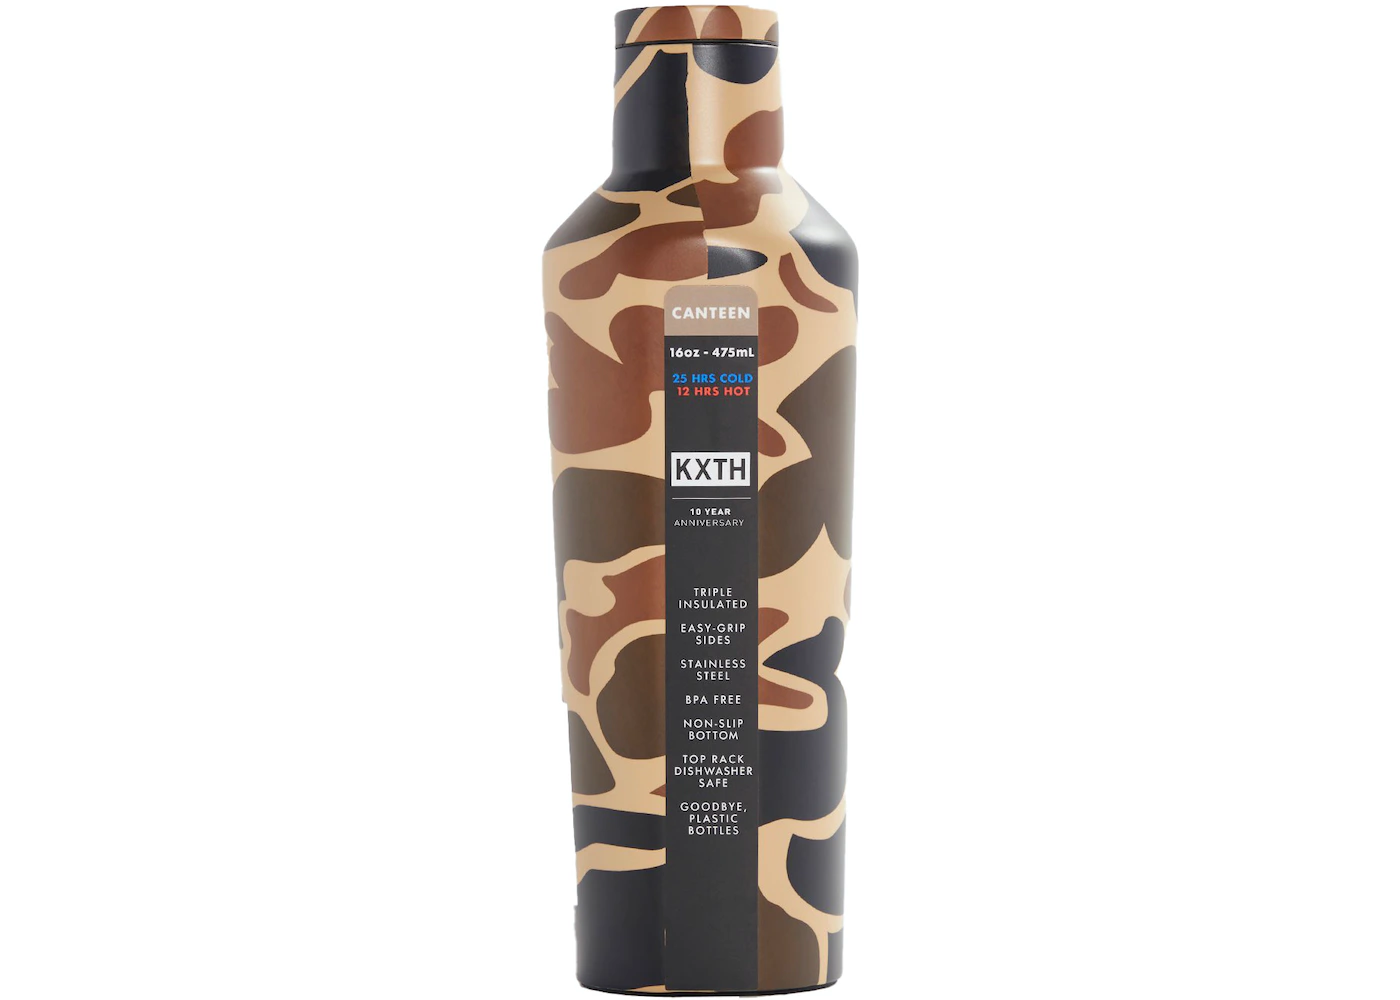 https://images.stockx.com/images/Kith-Corkcicle-10-Year-Anniversary-16oz-Canteen-Duck-Camo-2.jpg?fit=fill&bg=FFFFFF&w=700&h=500&fm=webp&auto=compress&q=90&dpr=2&trim=color&updated_at=1636993388?height=78&width=78